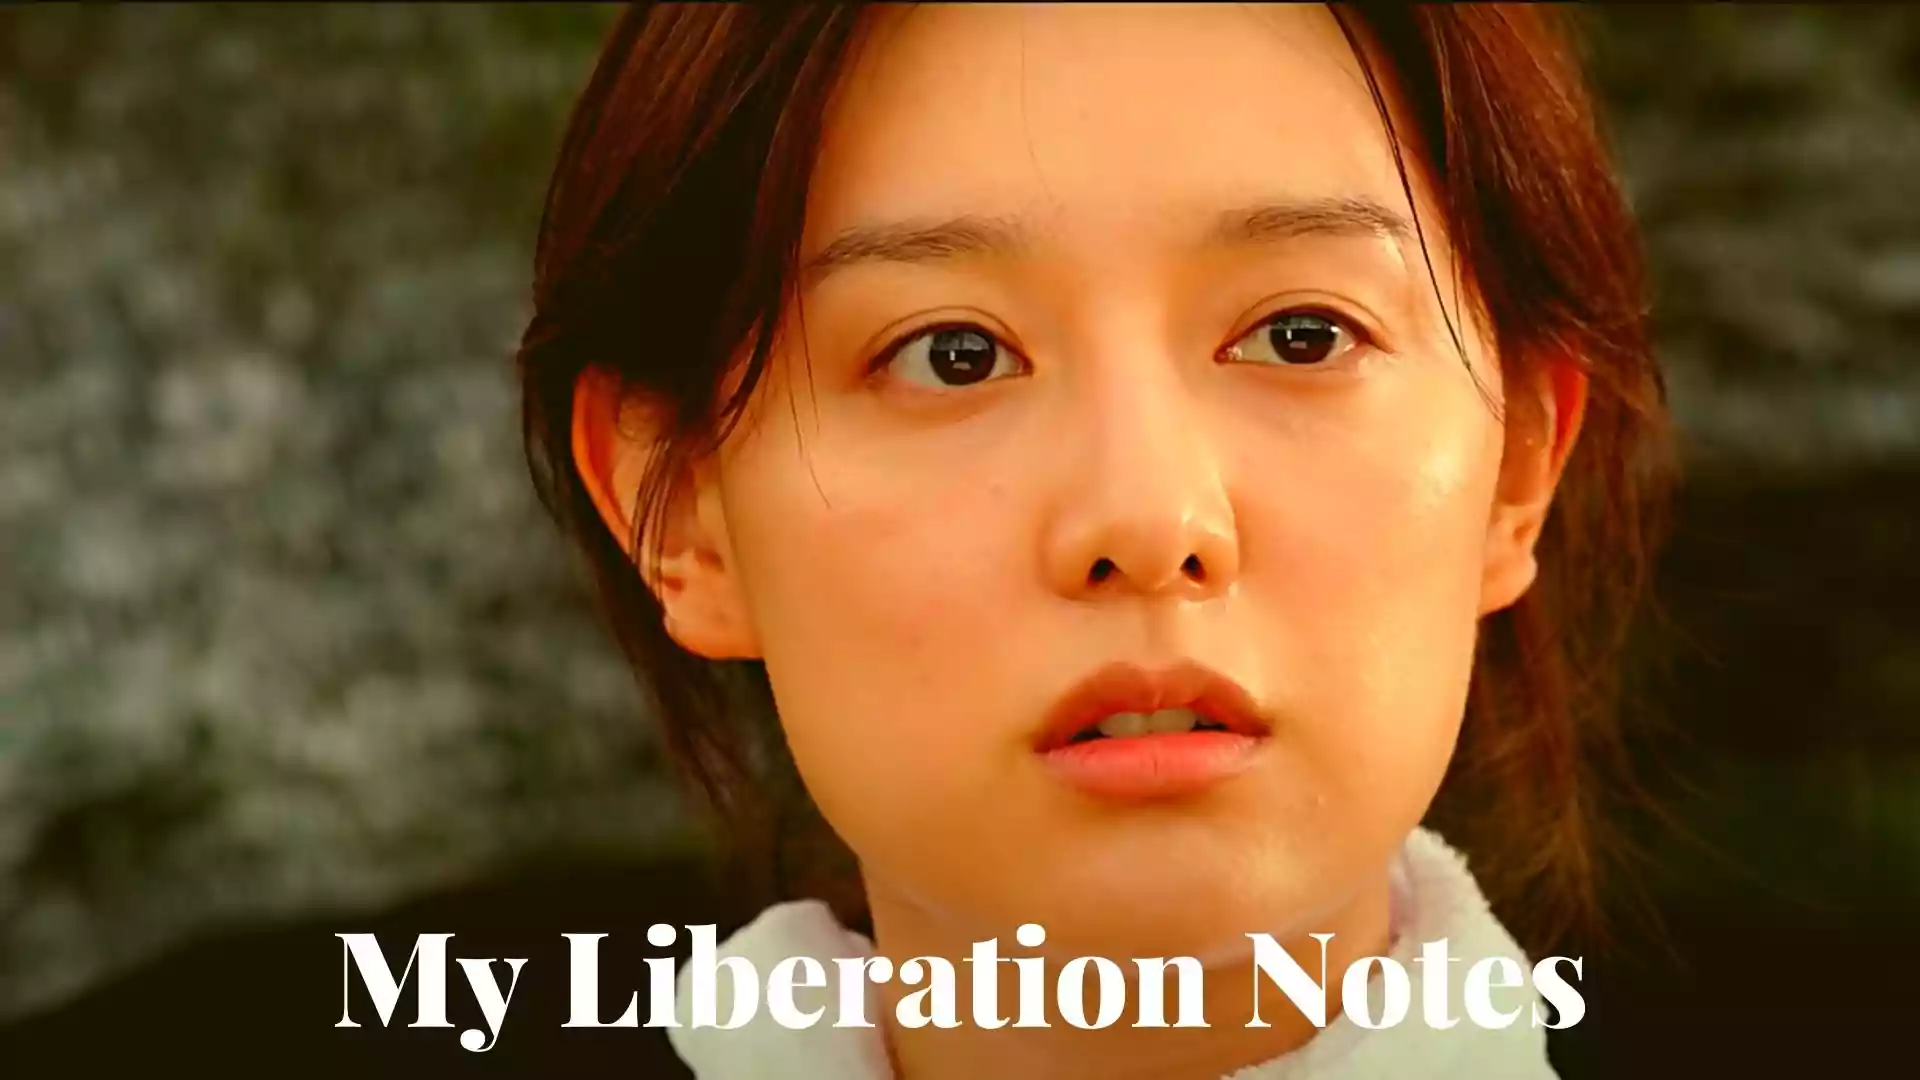 My Liberation Notes Wallpaper and Image